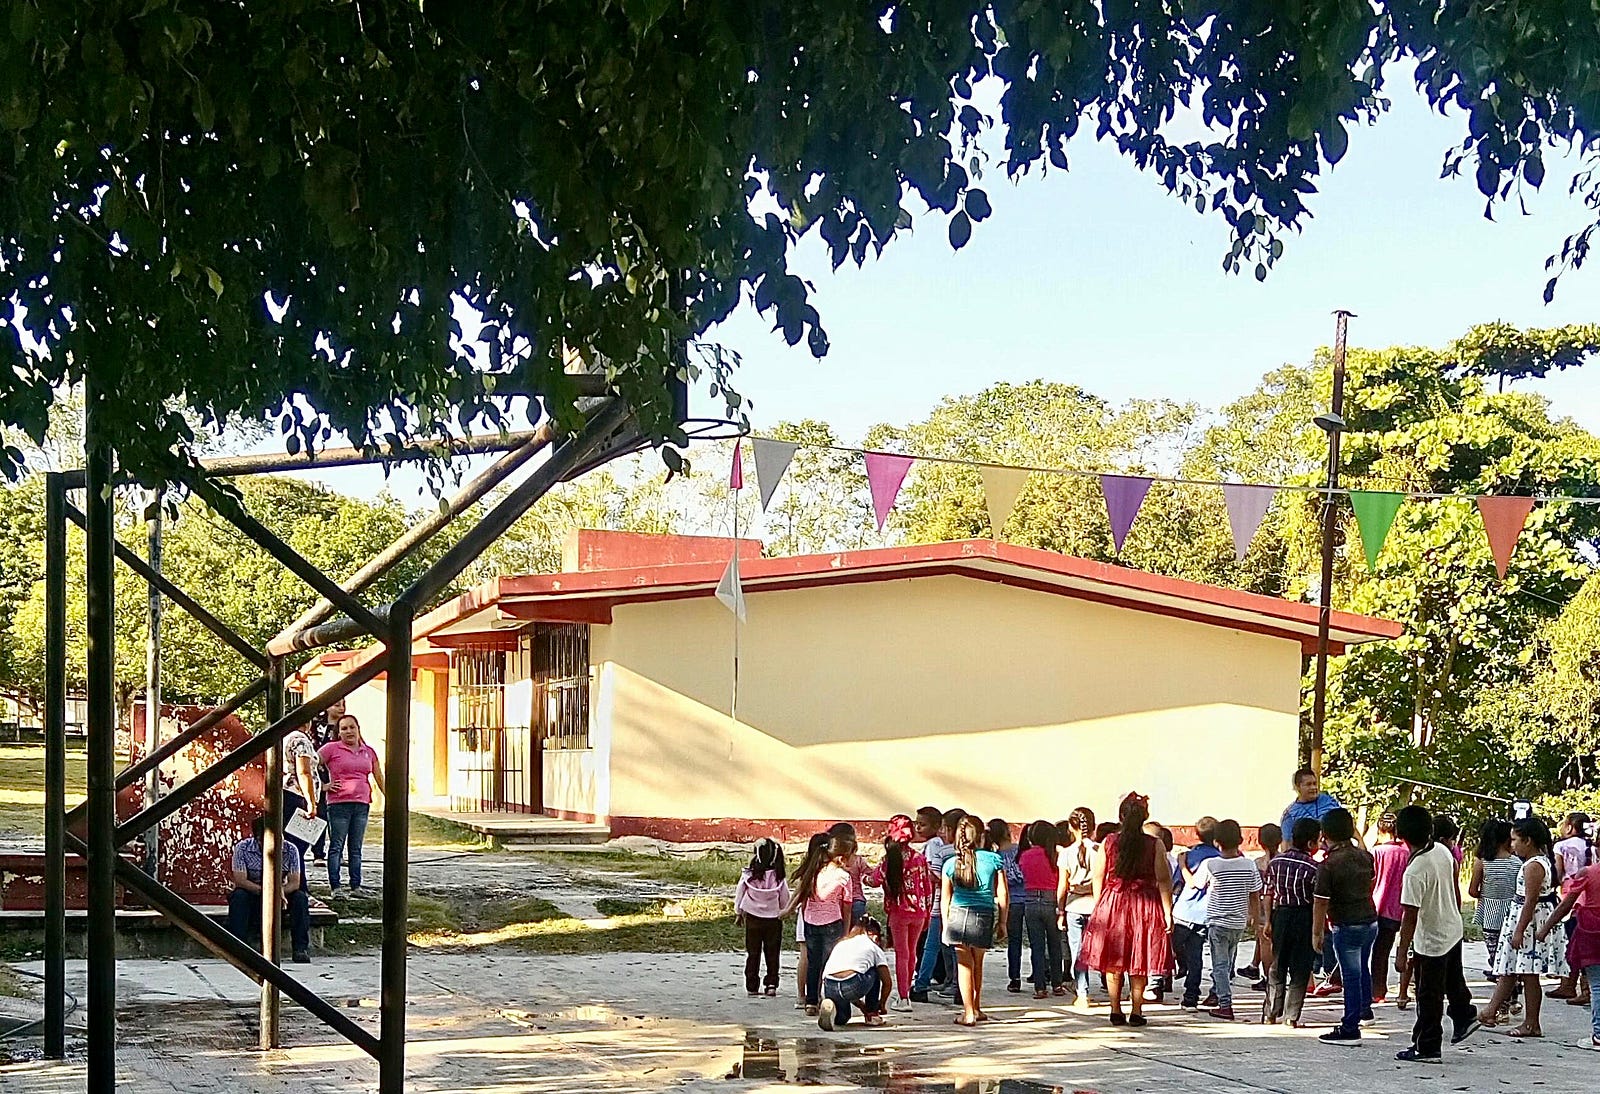 Students outside the Guadalupe Victoria school building.